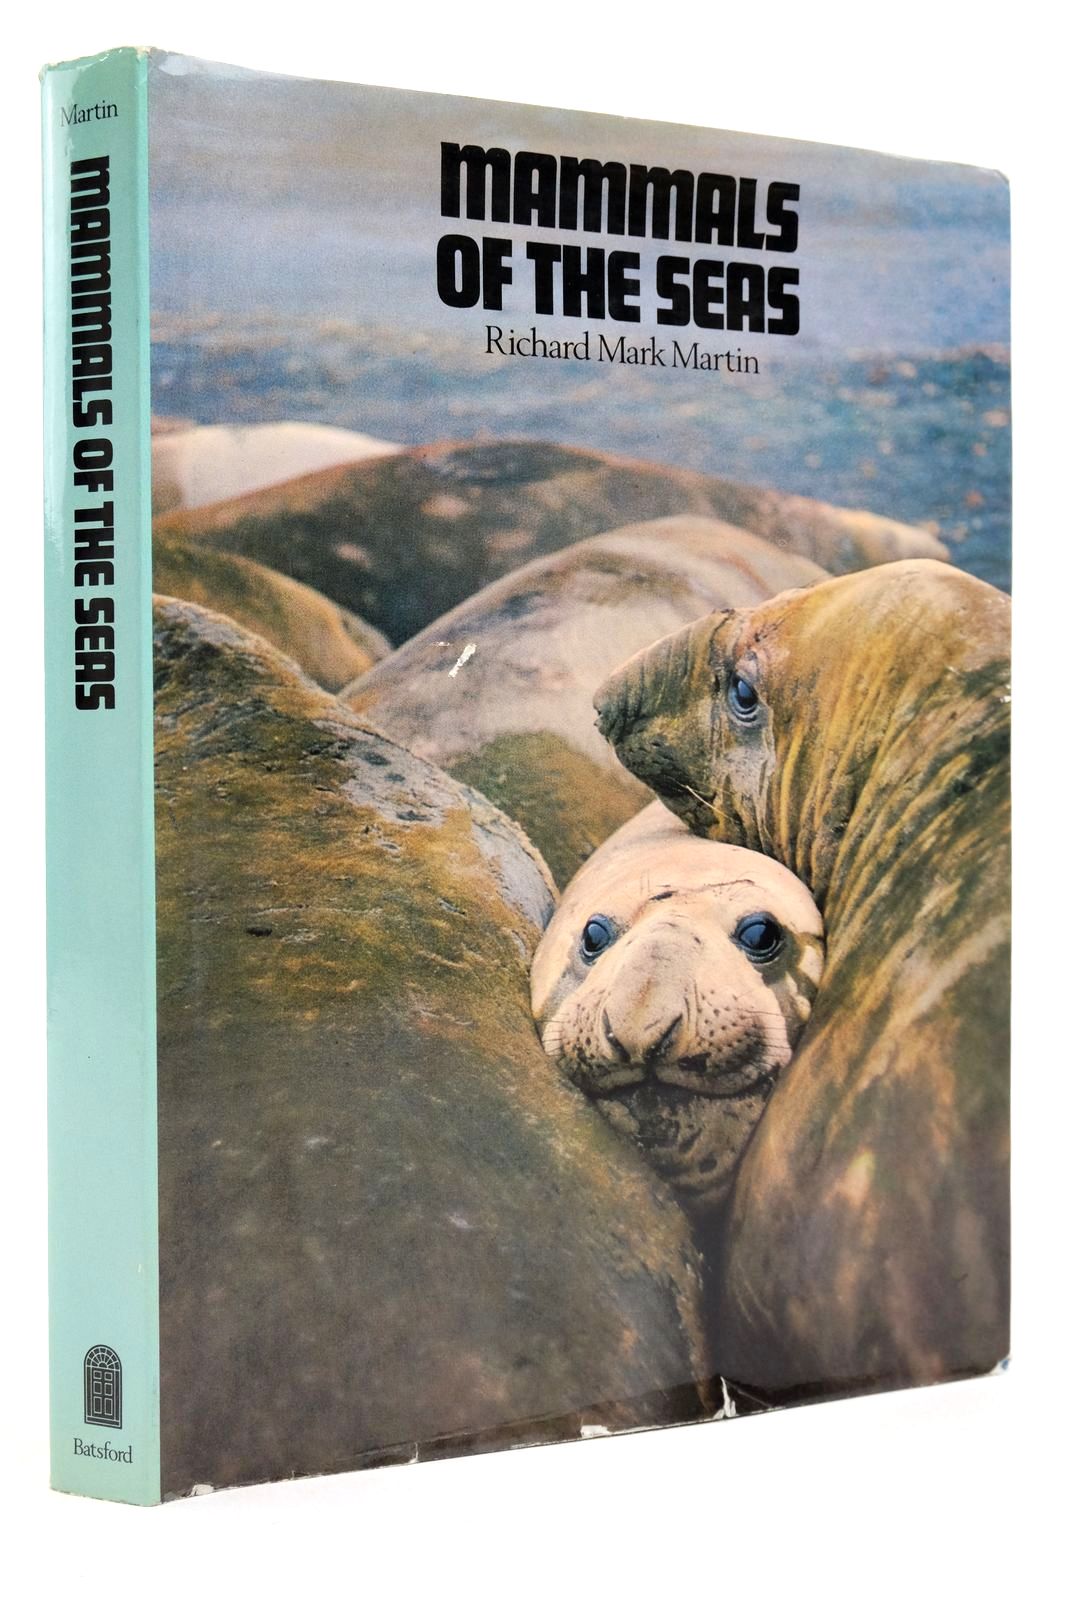 Photo of MAMMALS OF THE SEAS written by Martin, Richard Mark published by B.T. Batsford Ltd. (STOCK CODE: 2139129)  for sale by Stella & Rose's Books